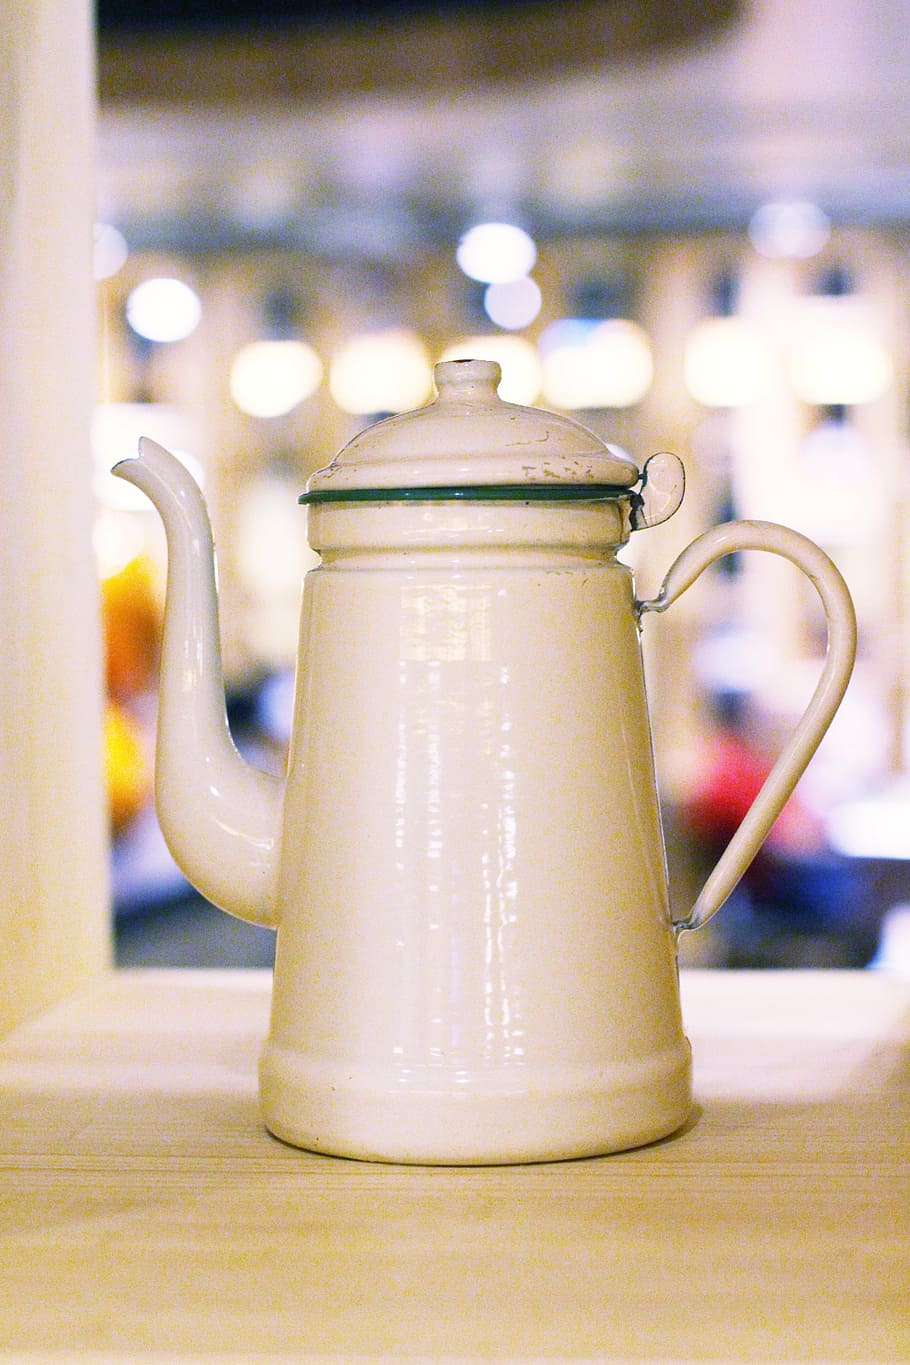 tin, teapot, white, food and drink, still life, drink, focus on foreground, close-up, indoors, table